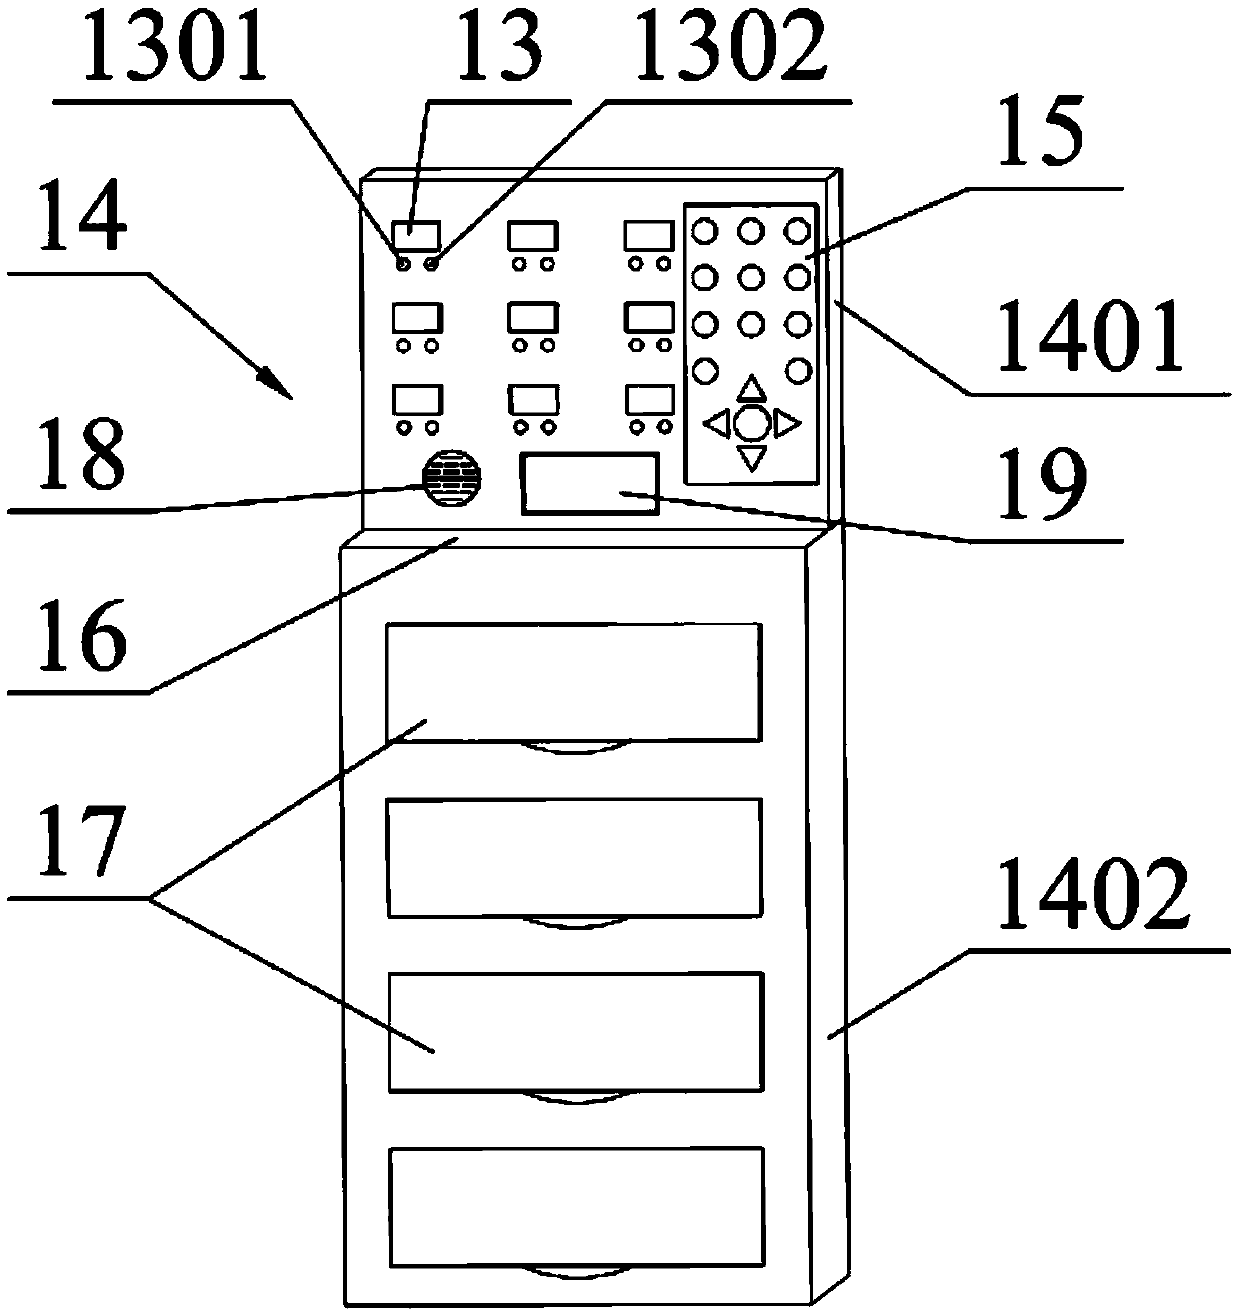 Method and equipment for automatic perception and reminder of patient bed